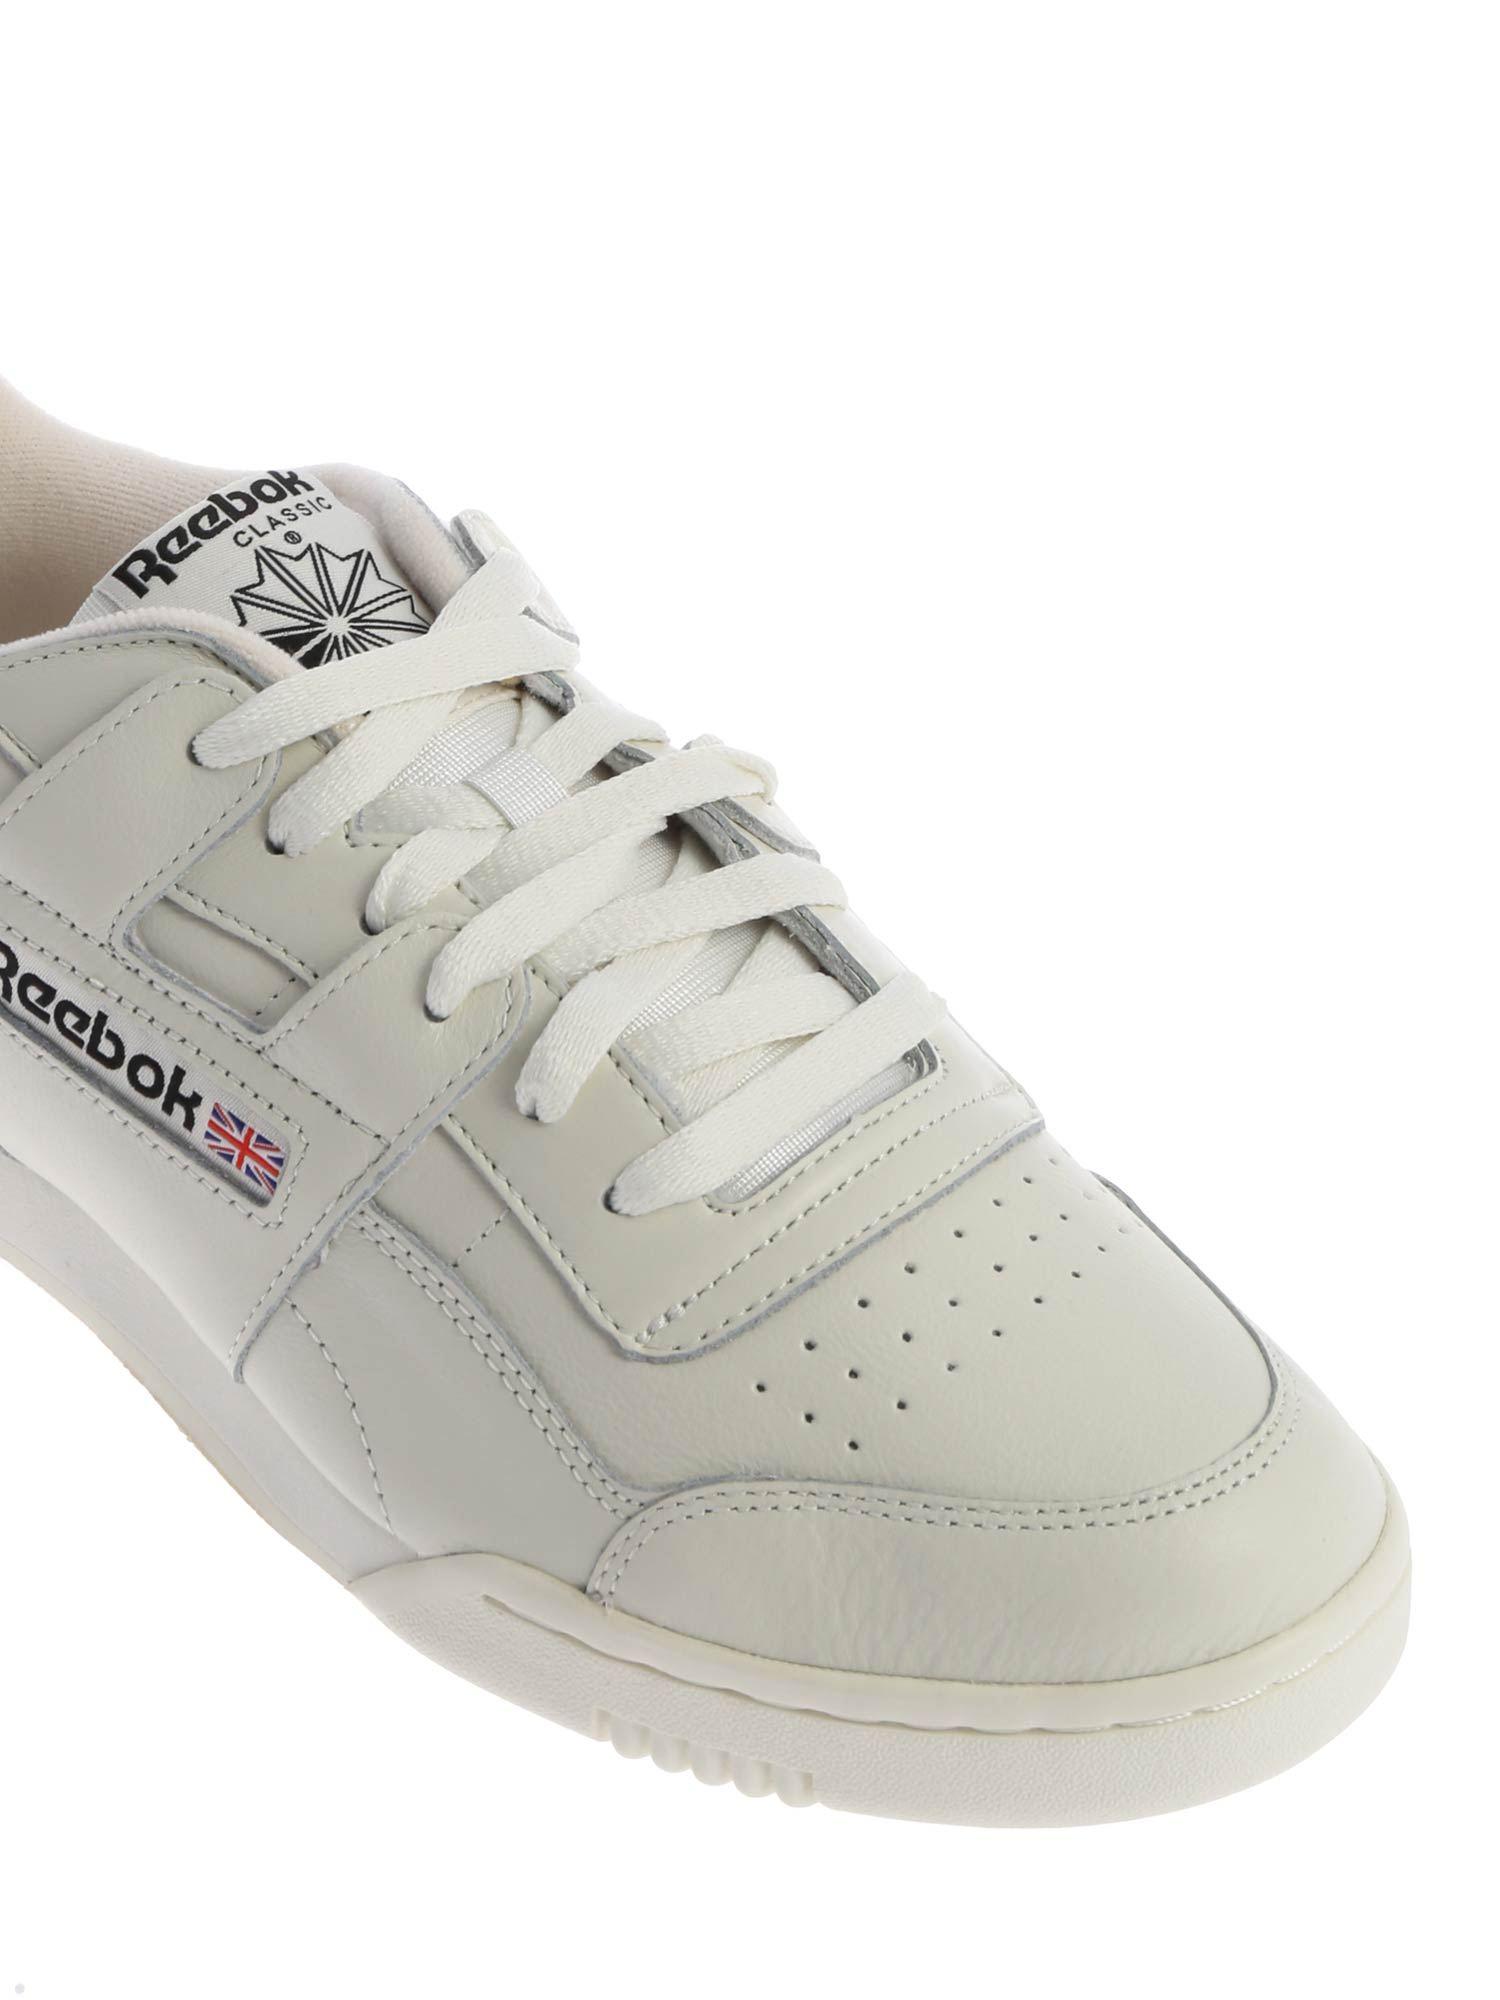 Reebok Leather Creamcolored "workout Plus Mu" Sneakers in